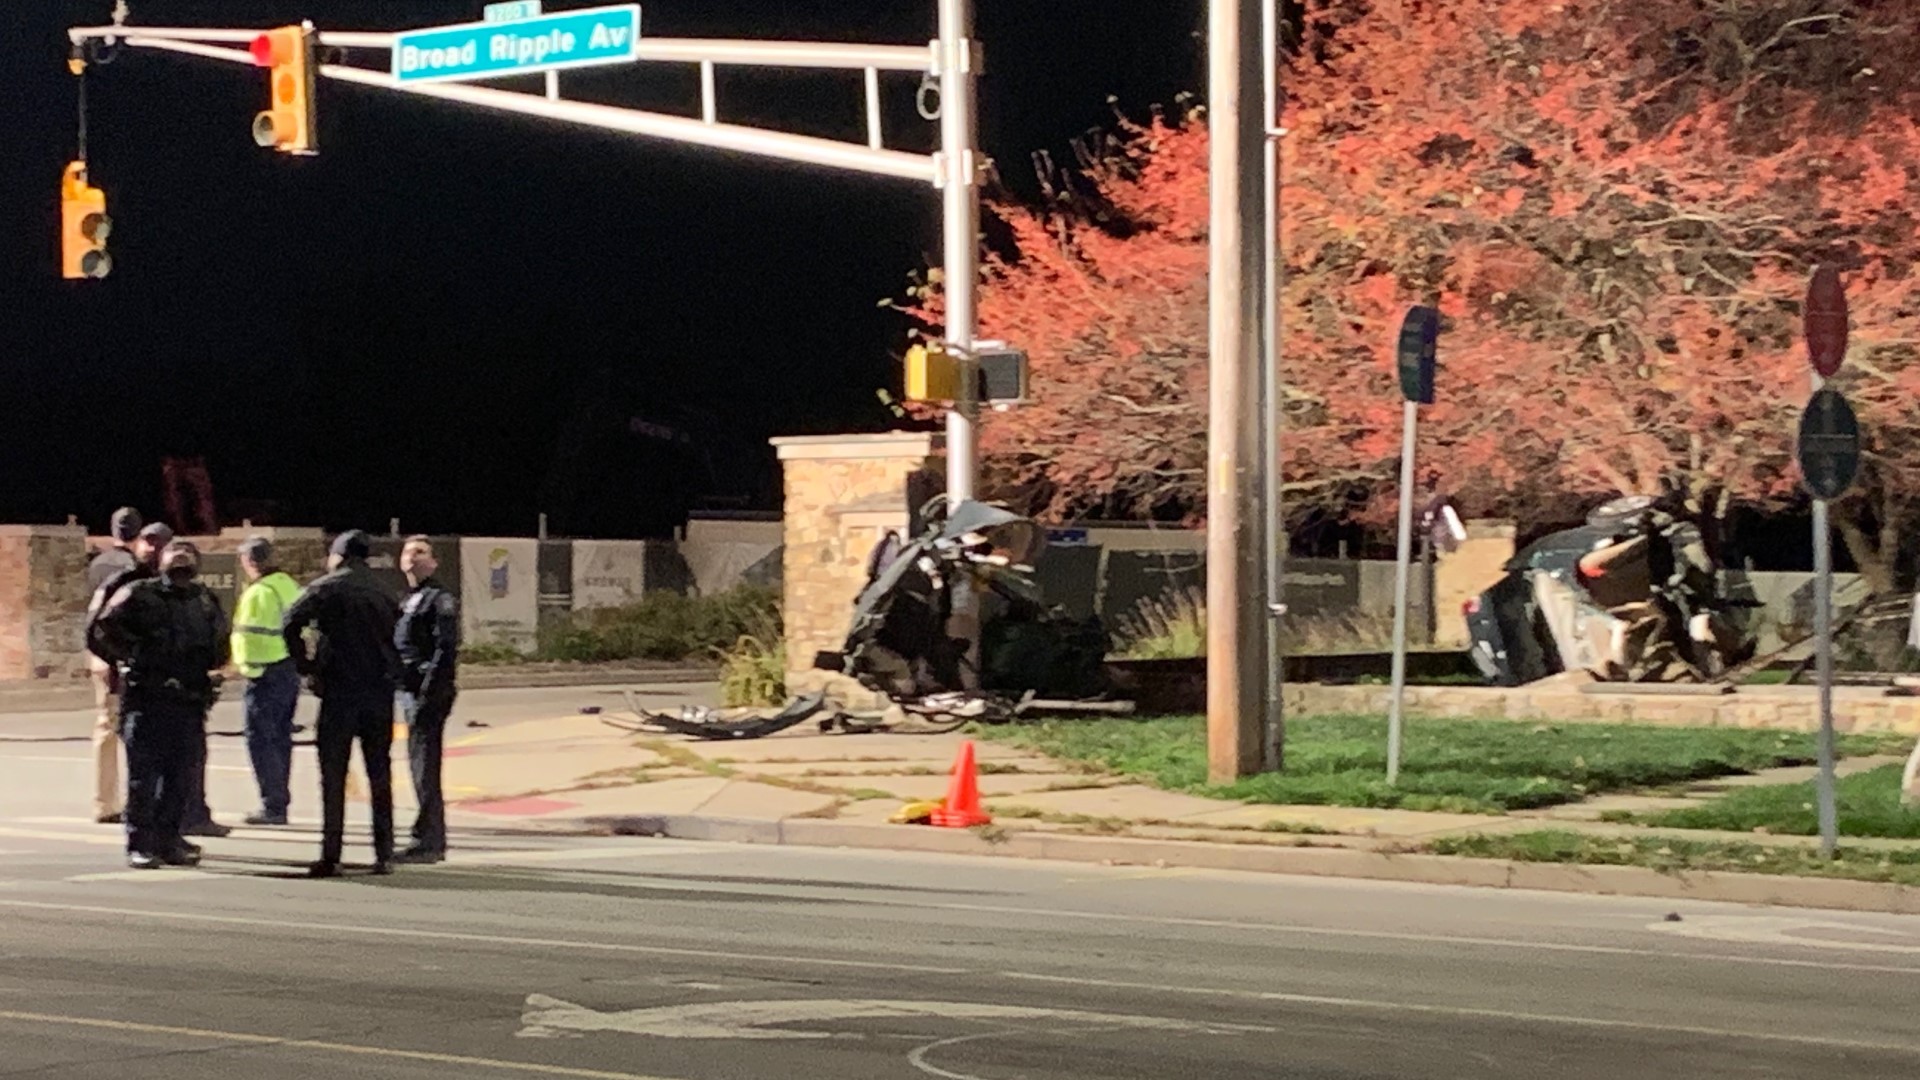 The crash happened at the intersection of Broad Ripple and Primrose avenues Wednesday around 1 a.m.